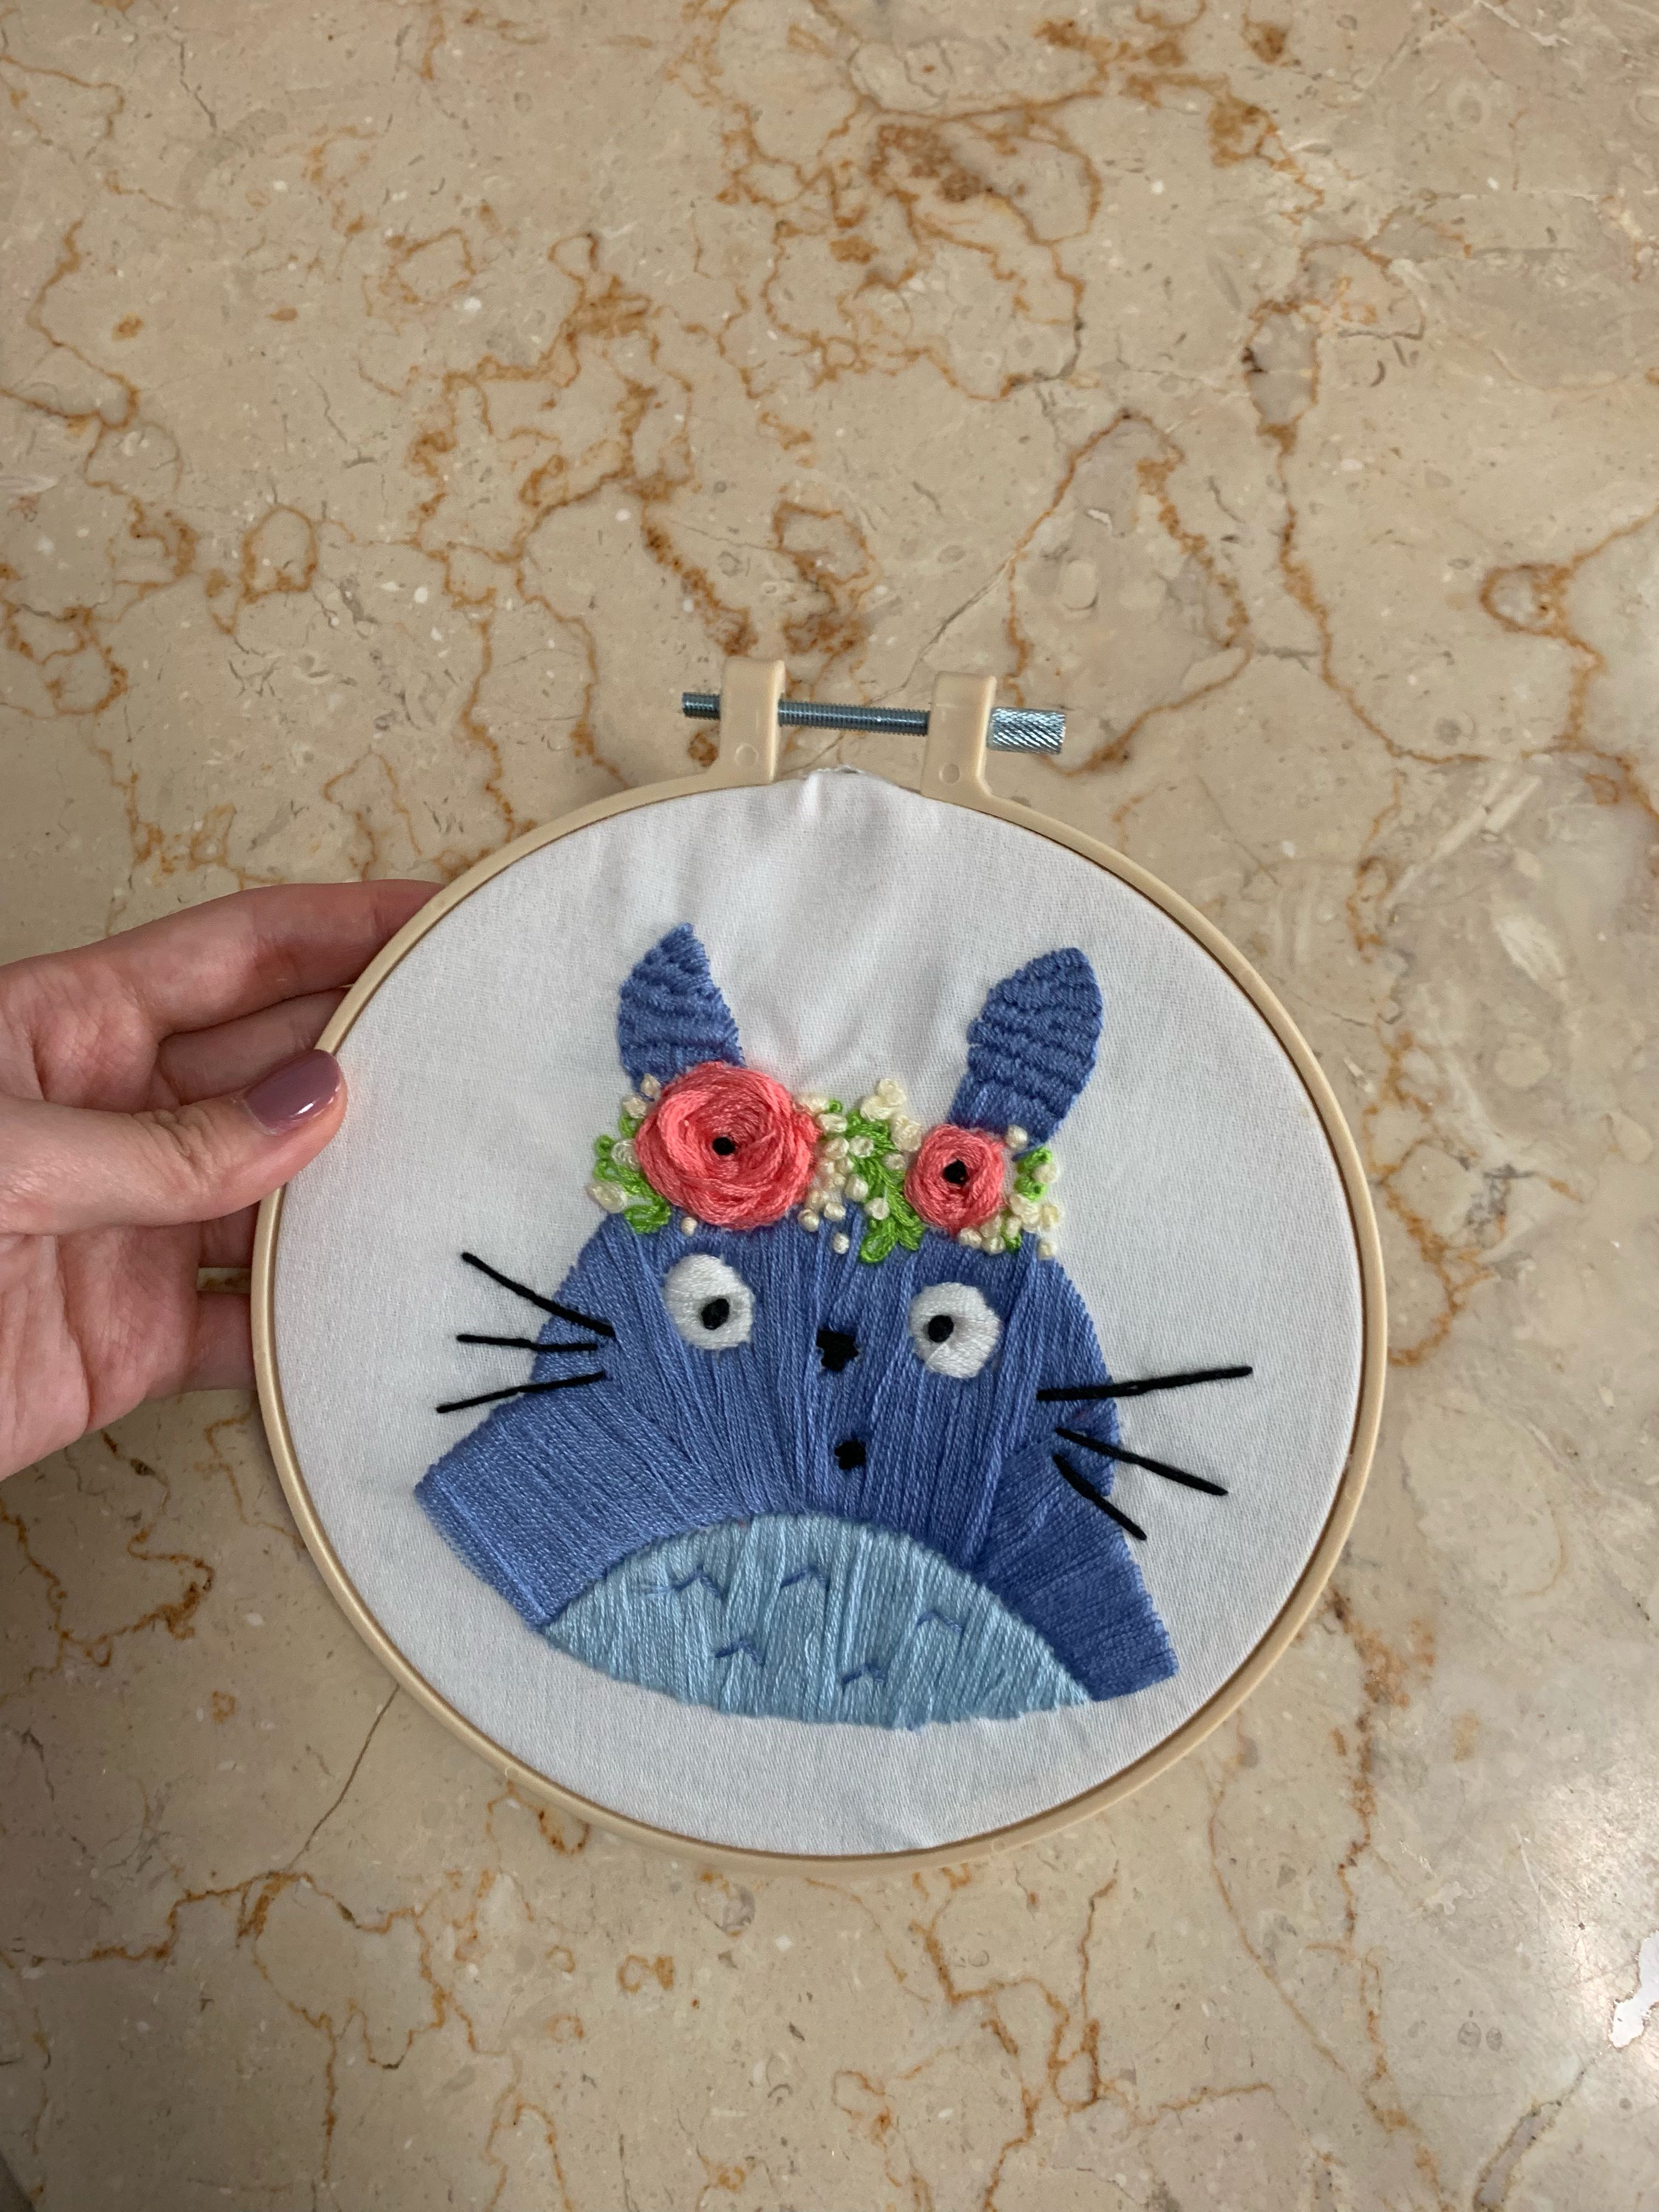 Totoro Embroidery Pattern Totoro Embroidery Wall Craft